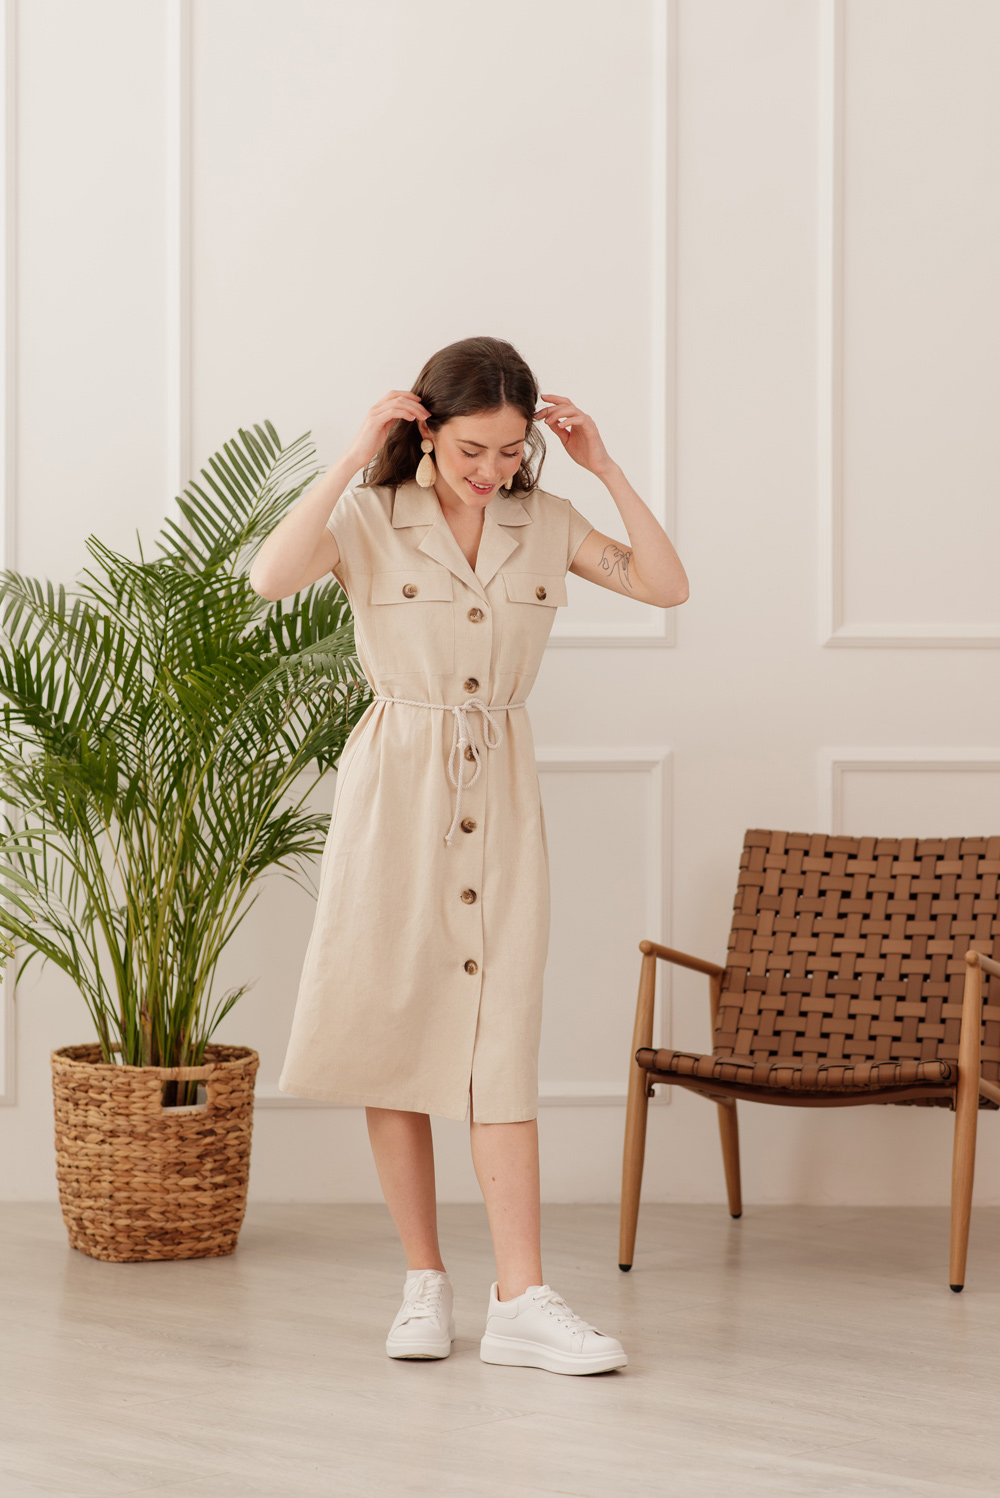 Linen dress with buttons and a belt